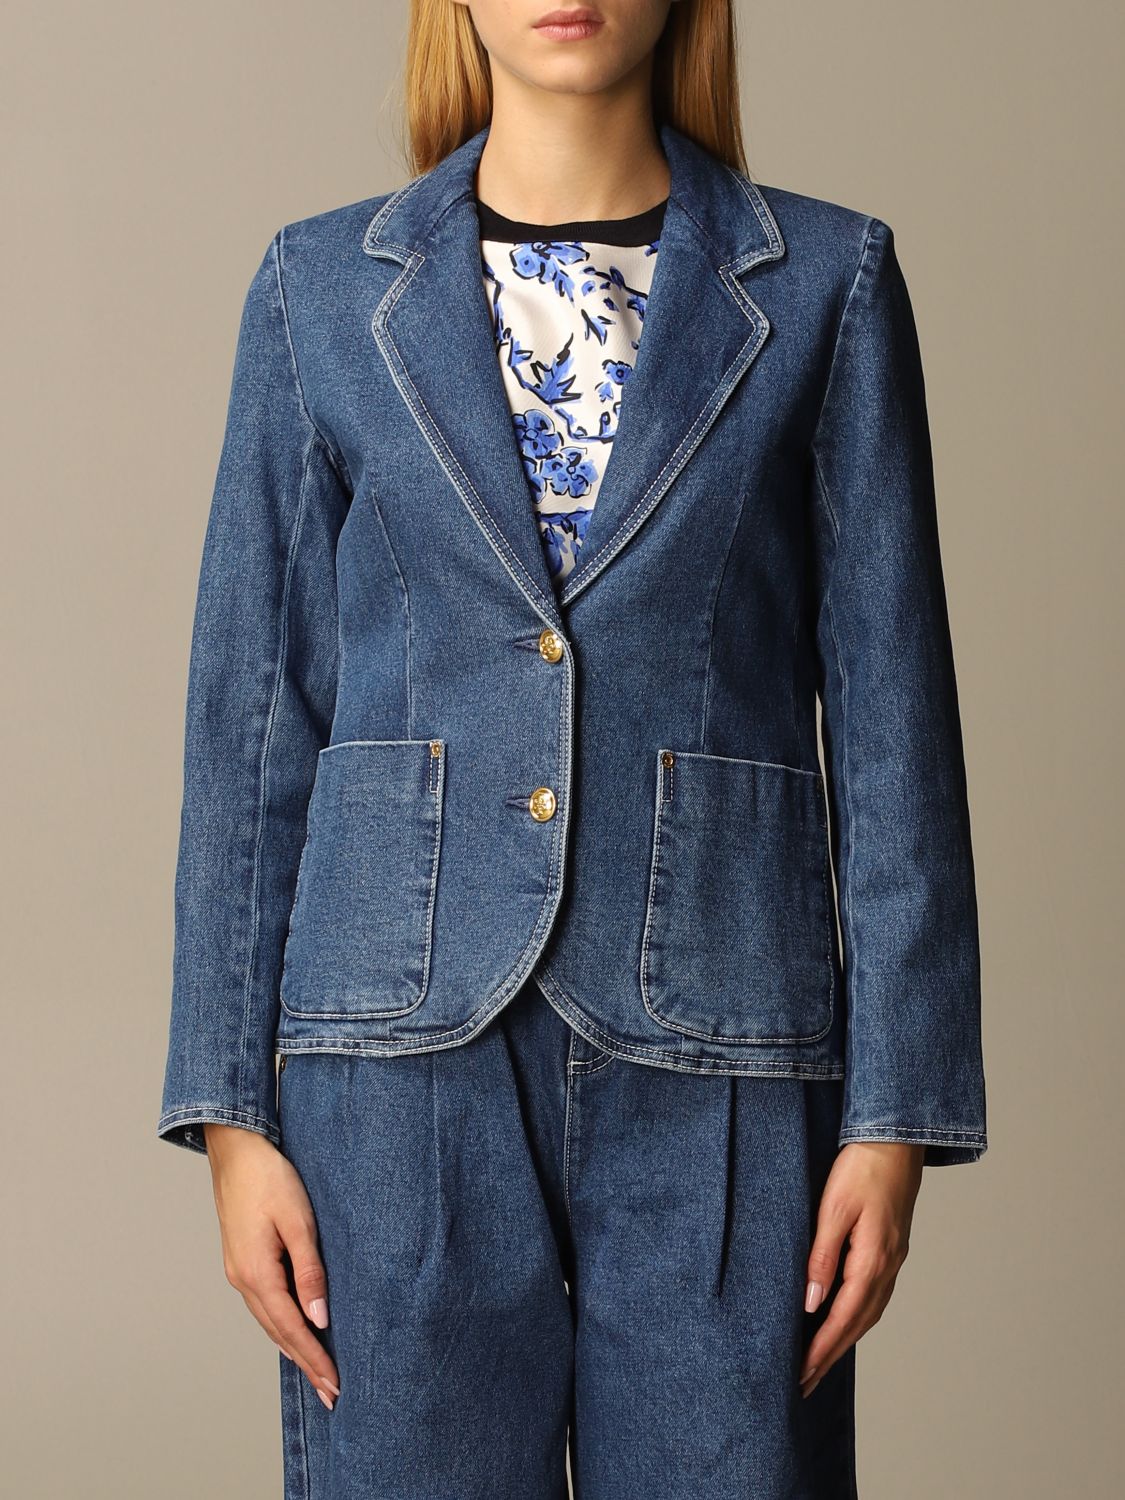 Tory Burch Outlet: blazer for woman - Blue | Tory Burch blazer 70386 online  on 